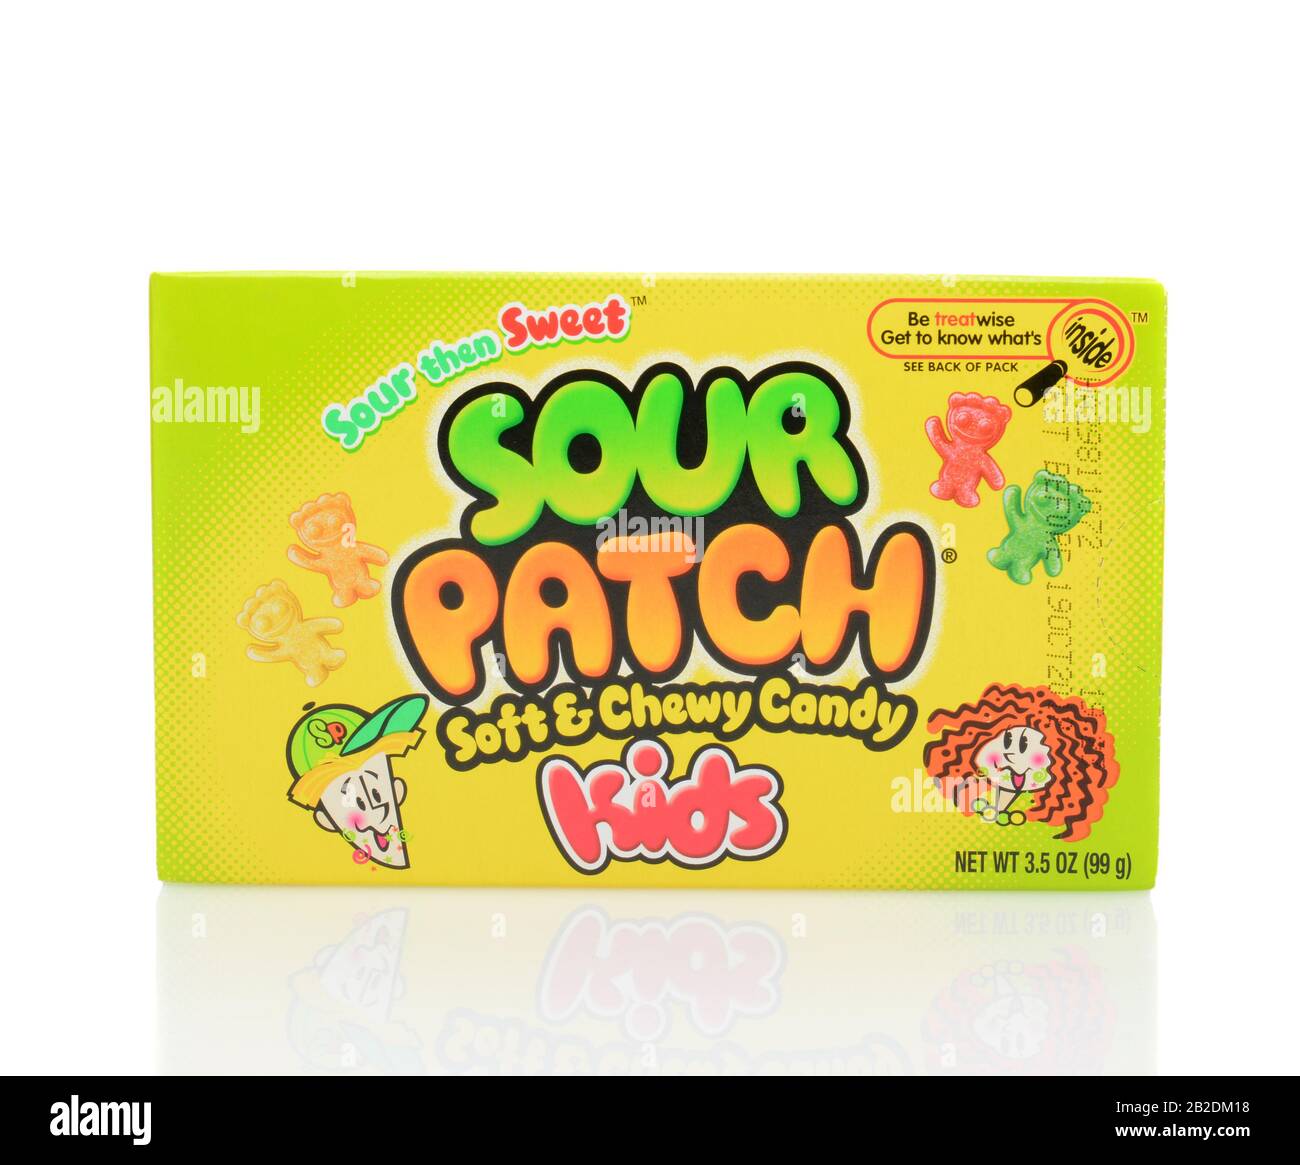 IRVINE, CA - JUNE 23, 2014: A box of Sour Patch Kids Candy. The soft and chewy candy is owned by the Cadbury Adams         Company and made in Canada. Stock Photo